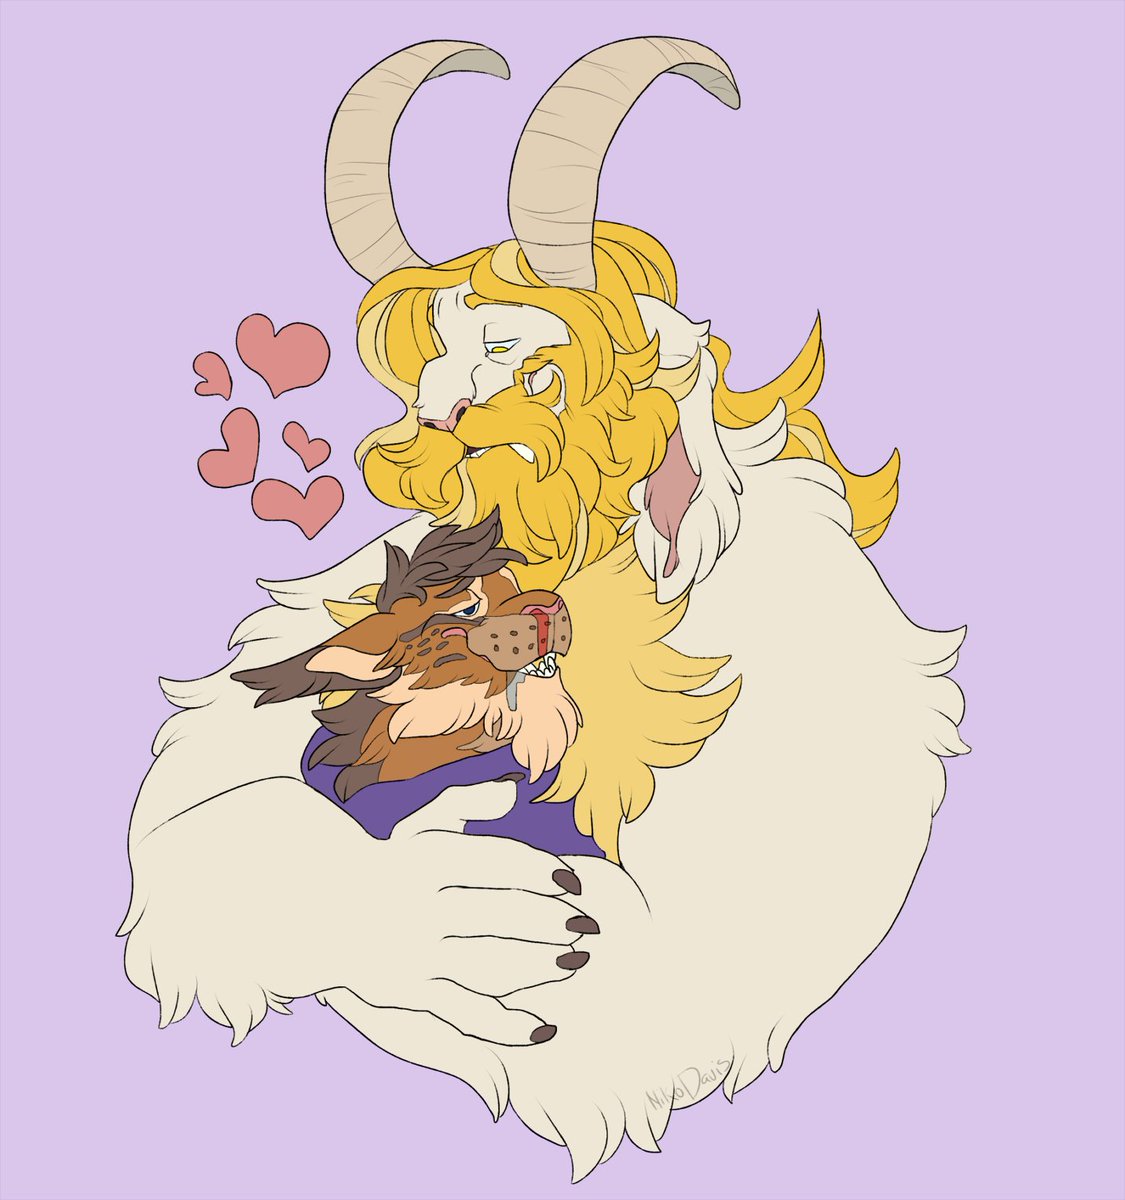 「Couldn't sleep cause too much sugar in me so I made Asgore huggin...